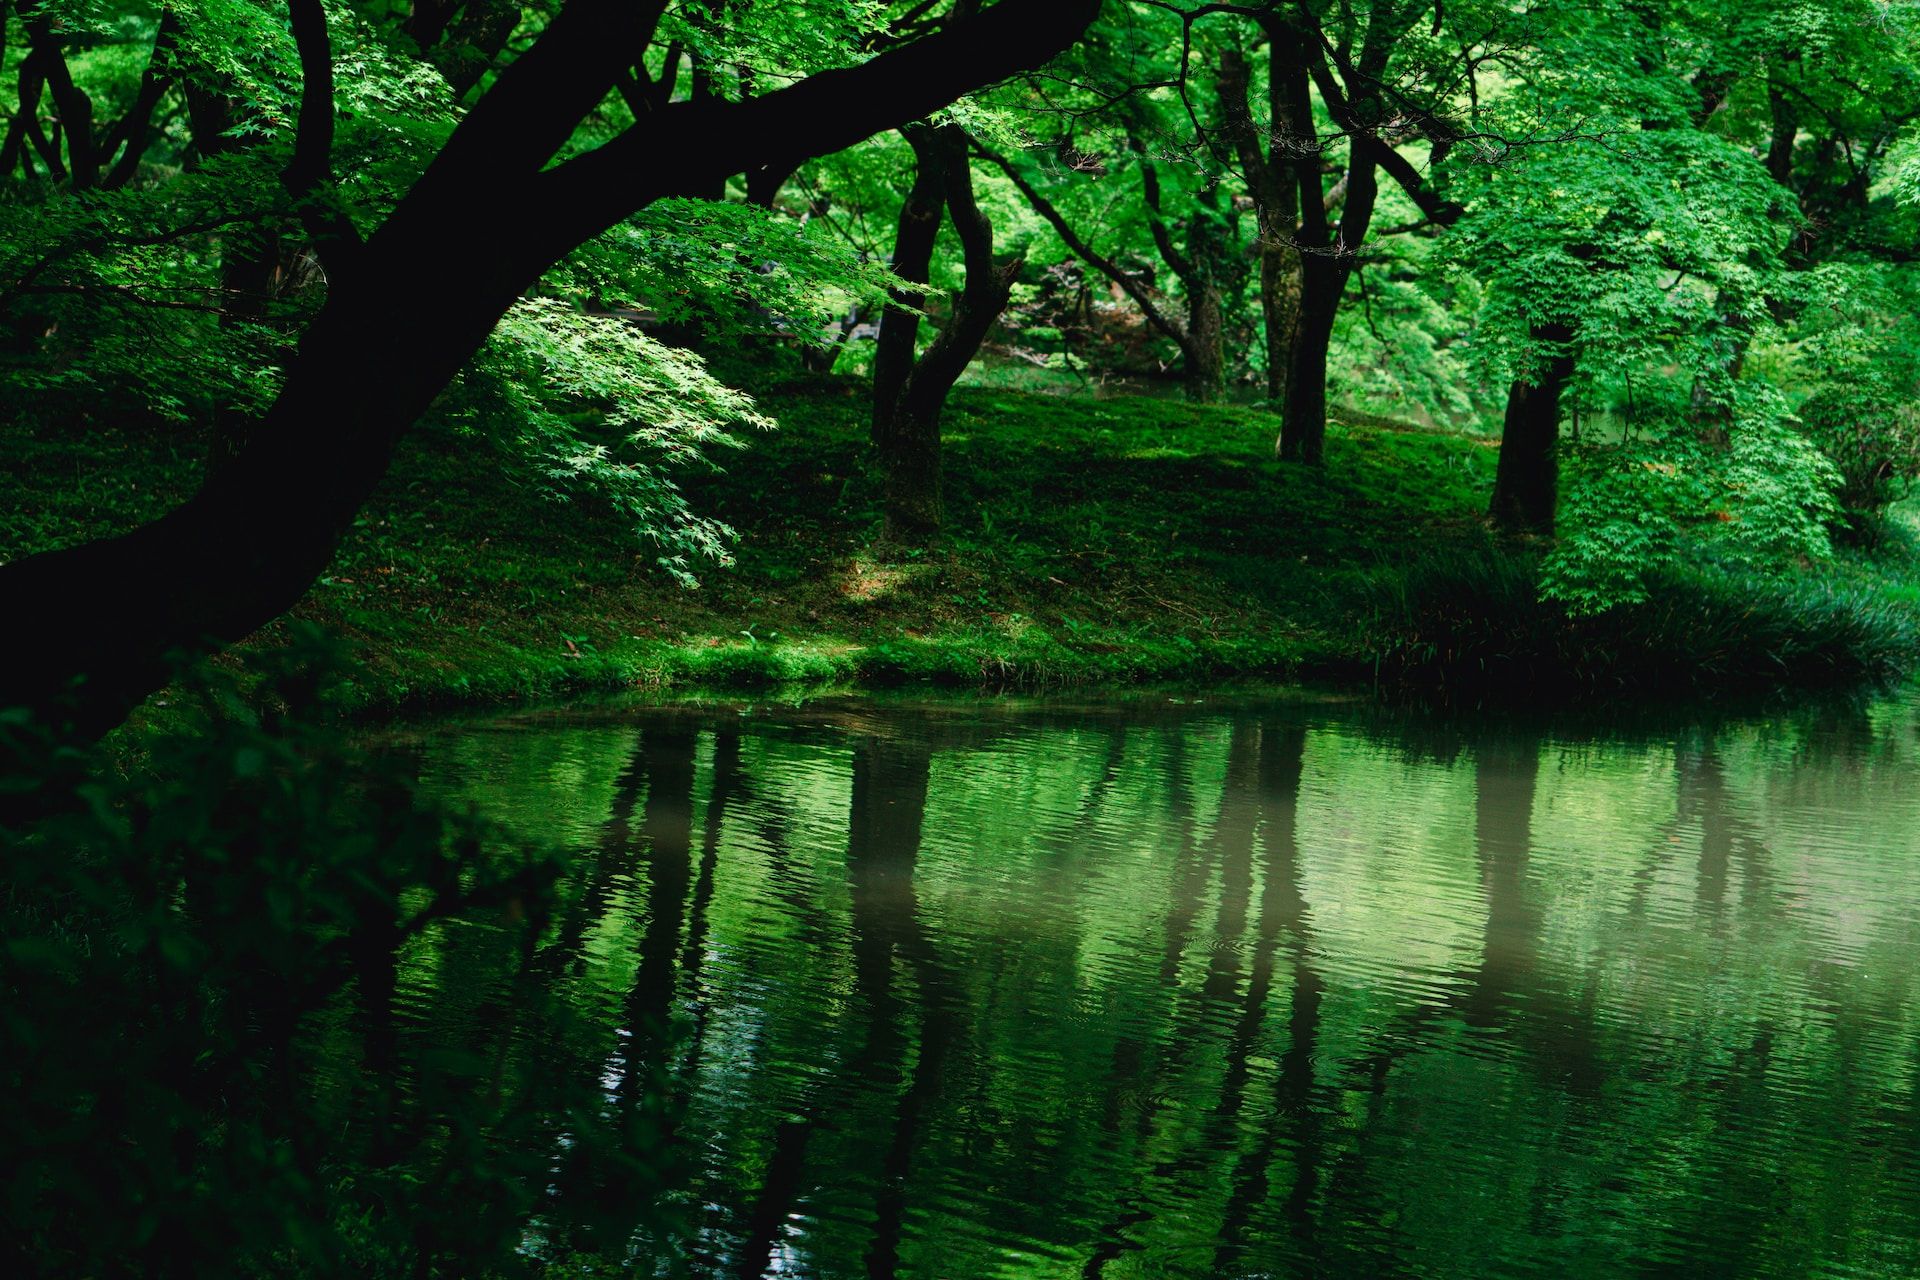 A still river beside peaceful green foliage at the Kyoto Botanical Gardens in Kyoto, Japan